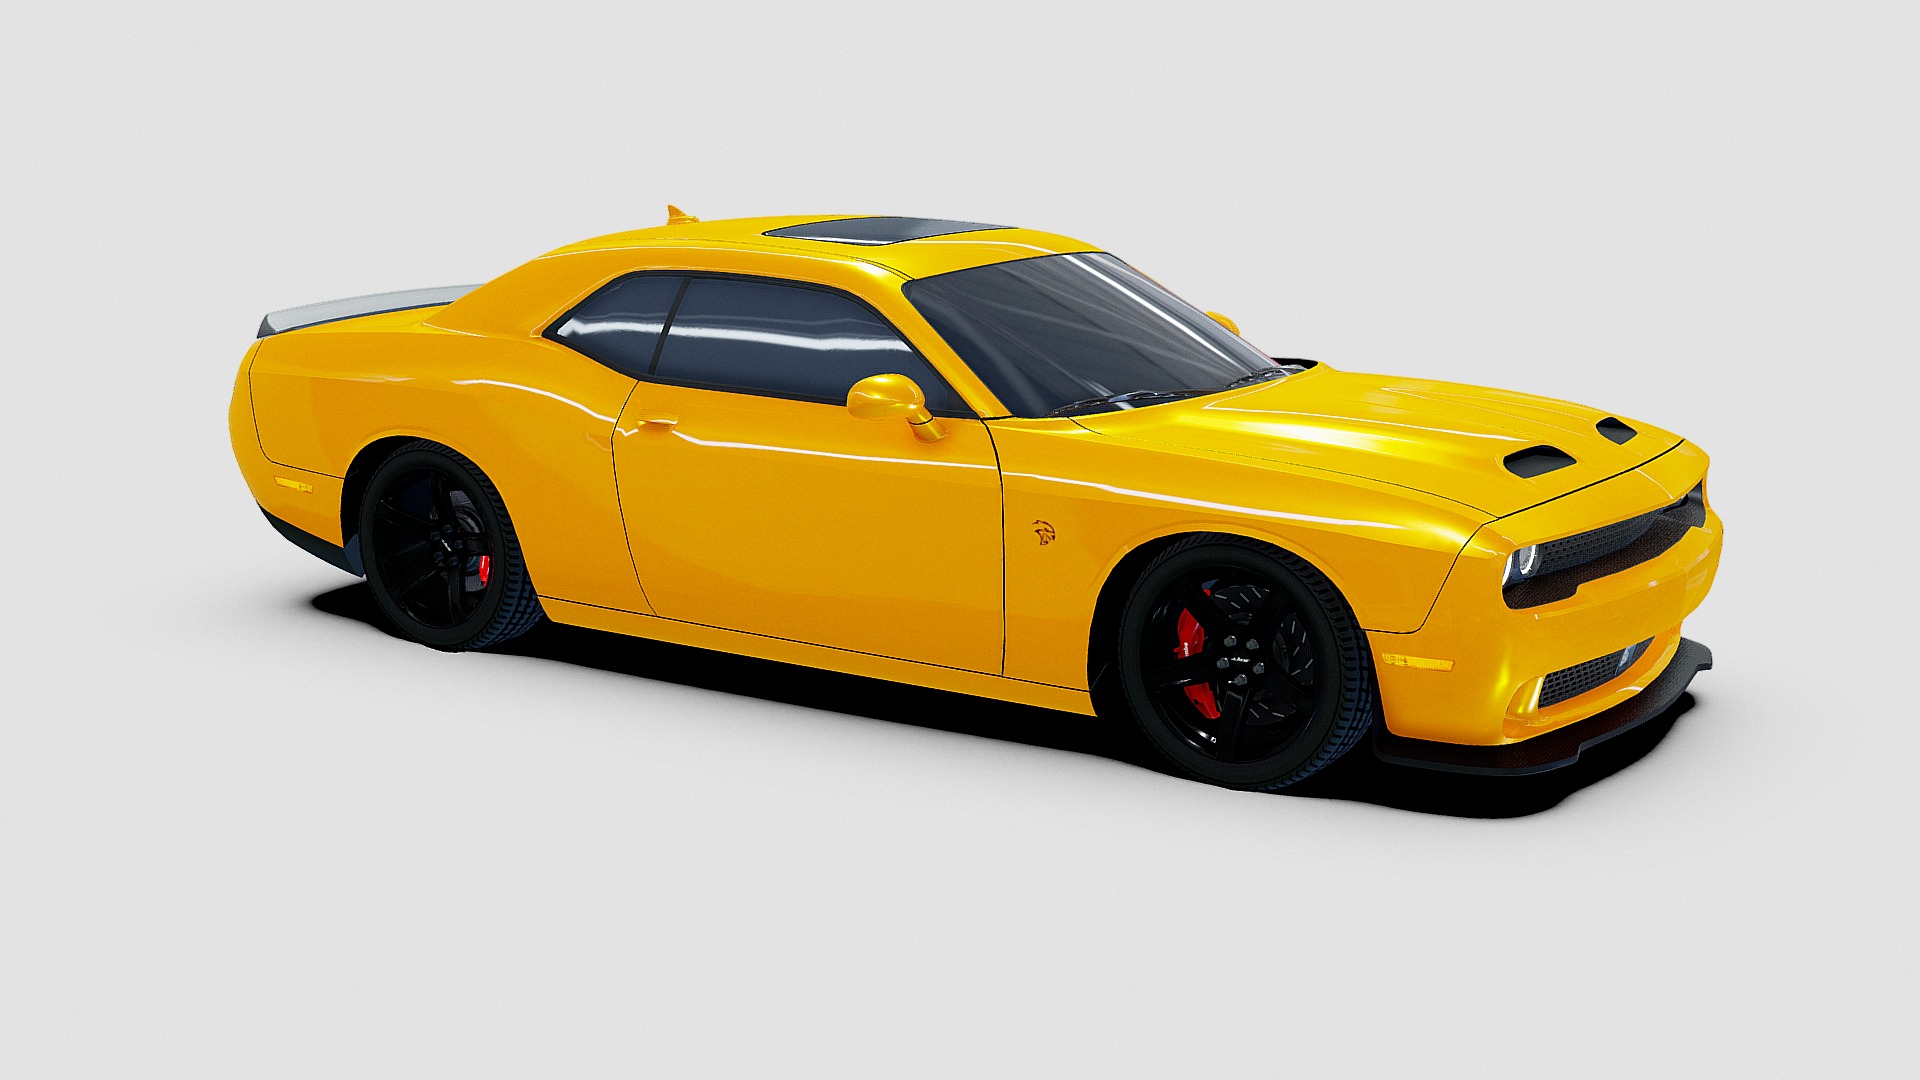 3D model Dodge Challenger HellCat 2019 - This is a 3D model of the Dodge Challenger HellCat 2019. The 3D model is about a yellow sports car.